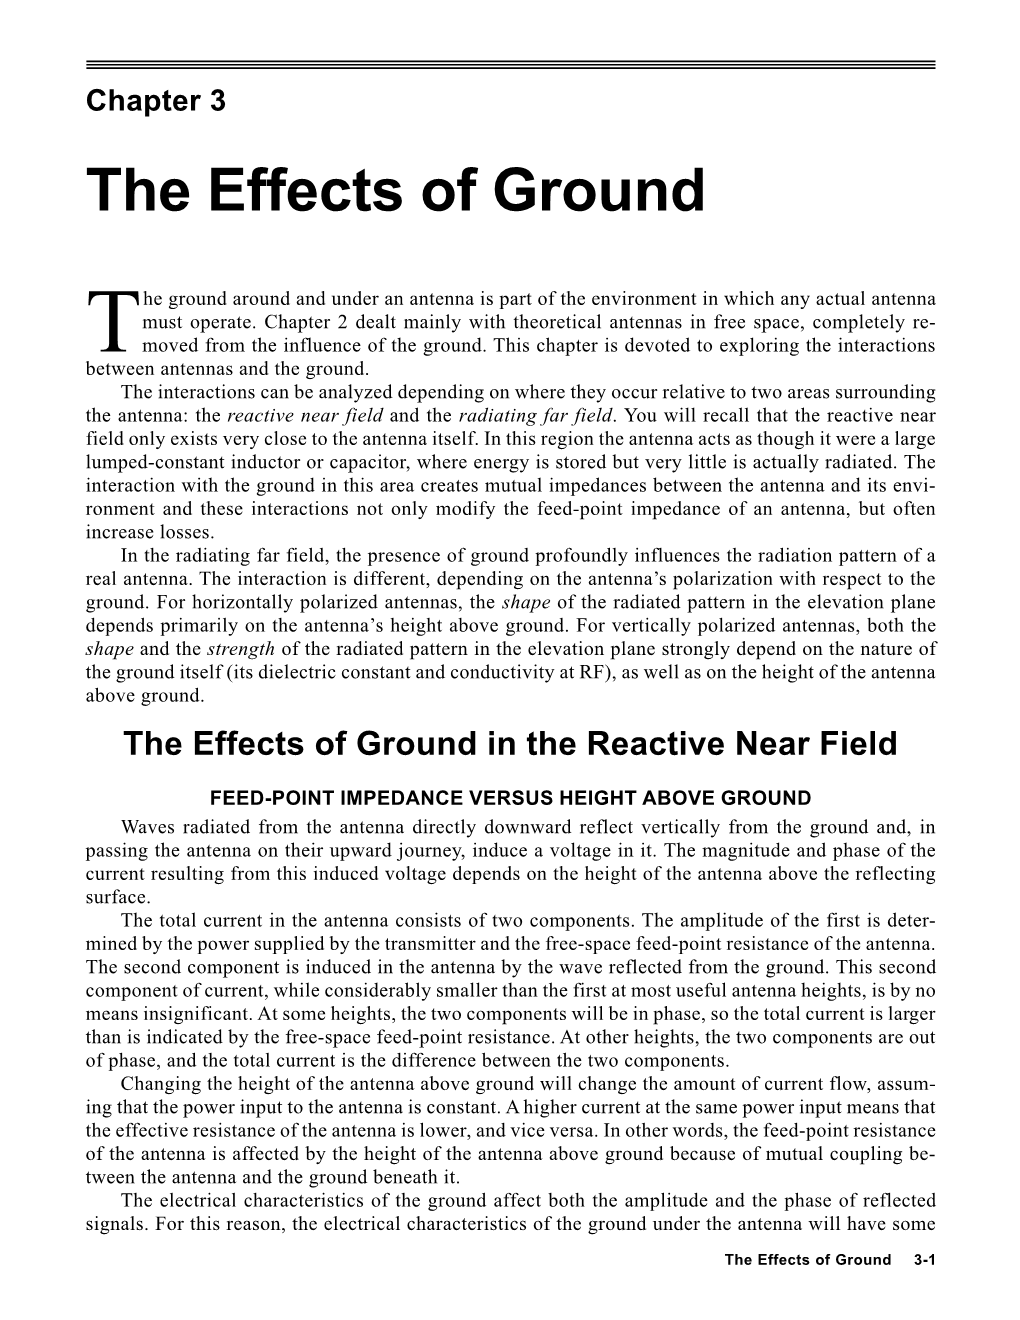 Chapter 3 the Effects of Ground